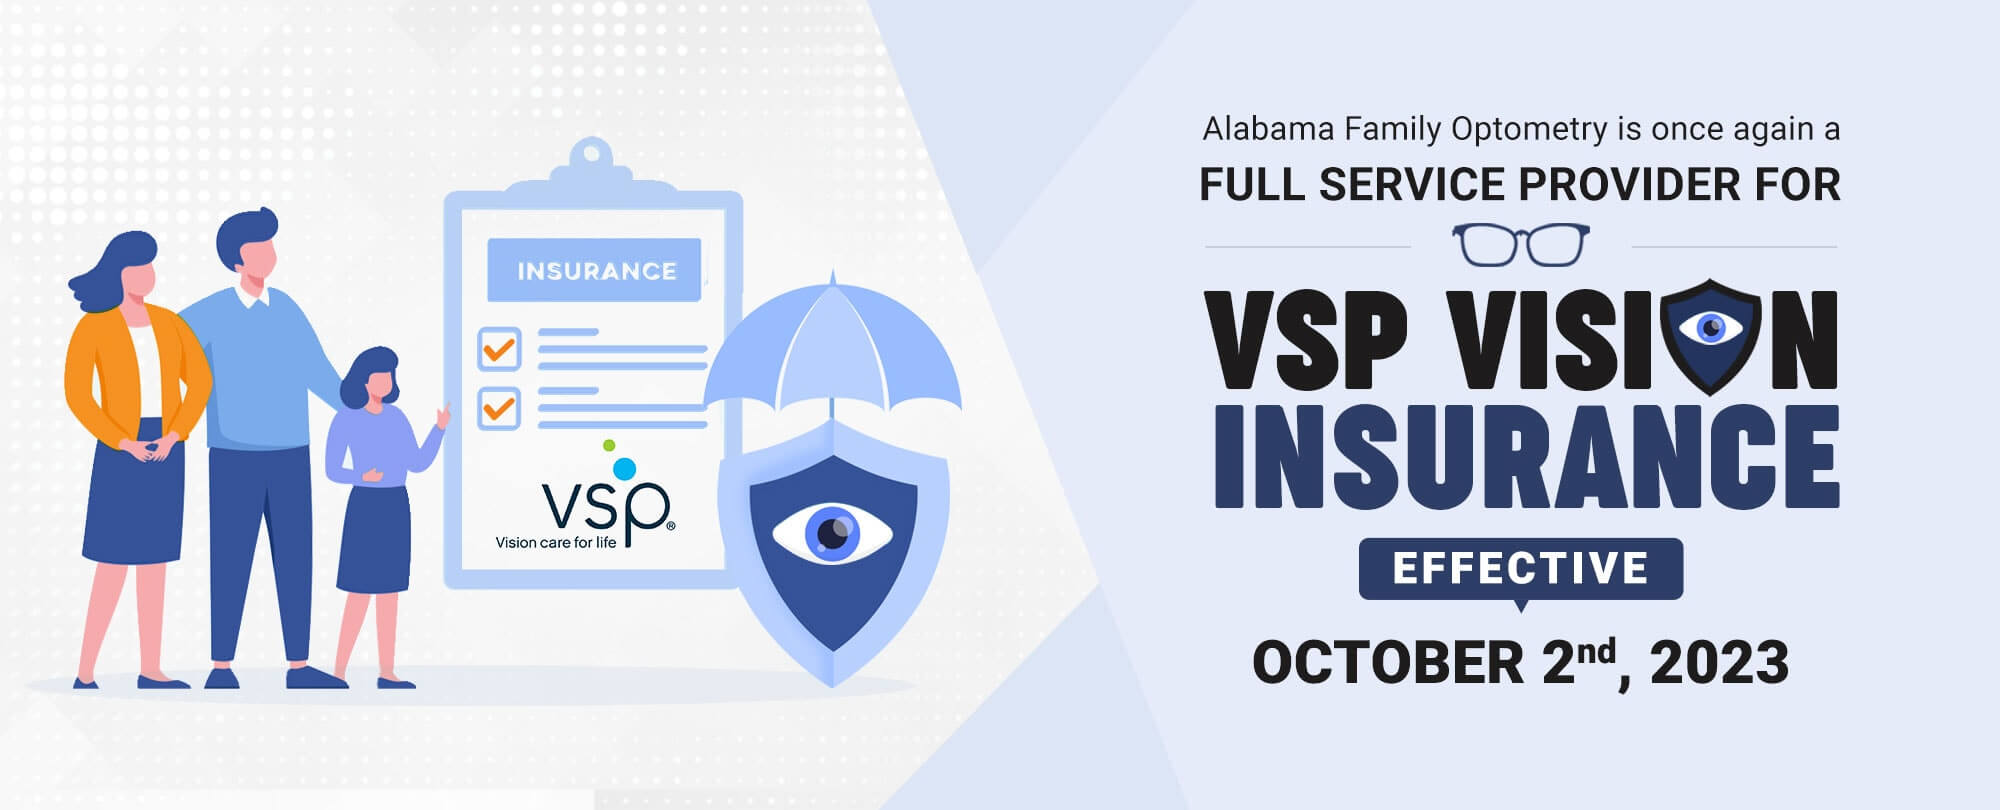 Alabama Family Optometry is a Full Service Provider of VSP Insurance